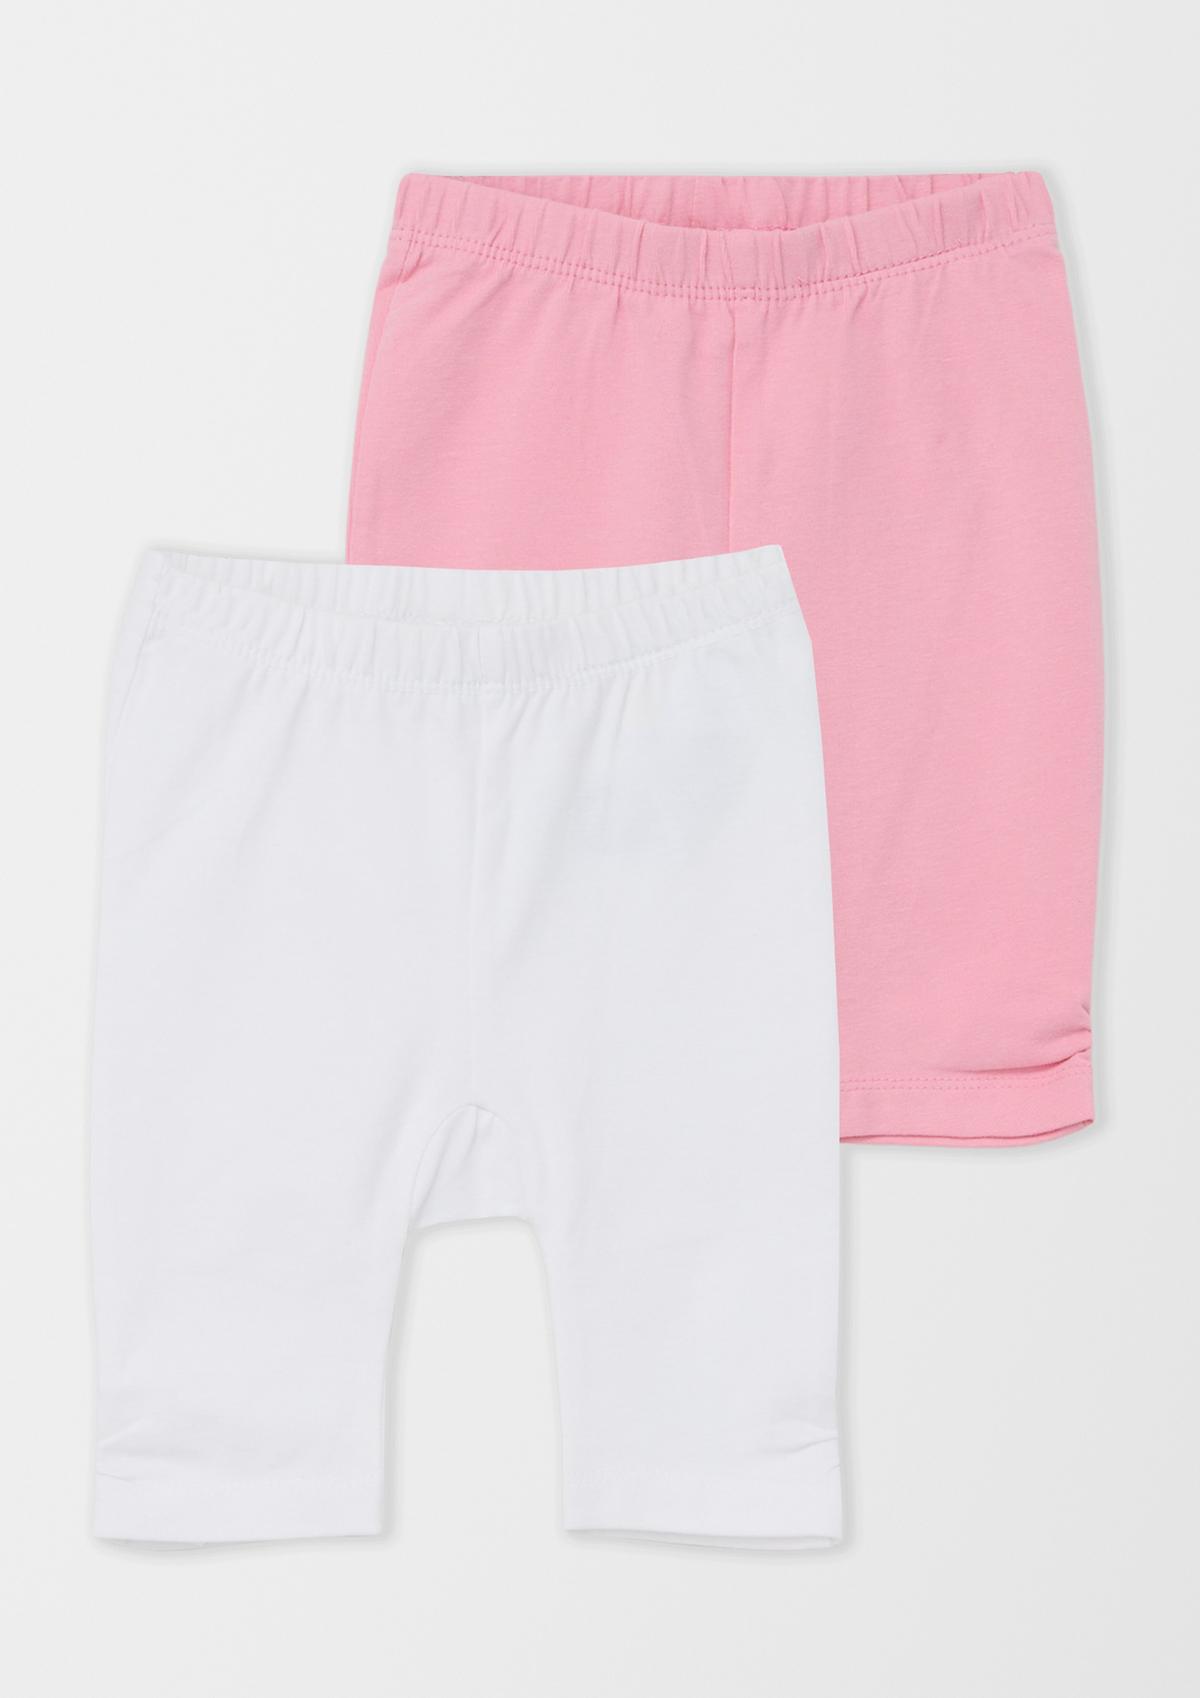 s.Oliver Leggings shorts in a double pack